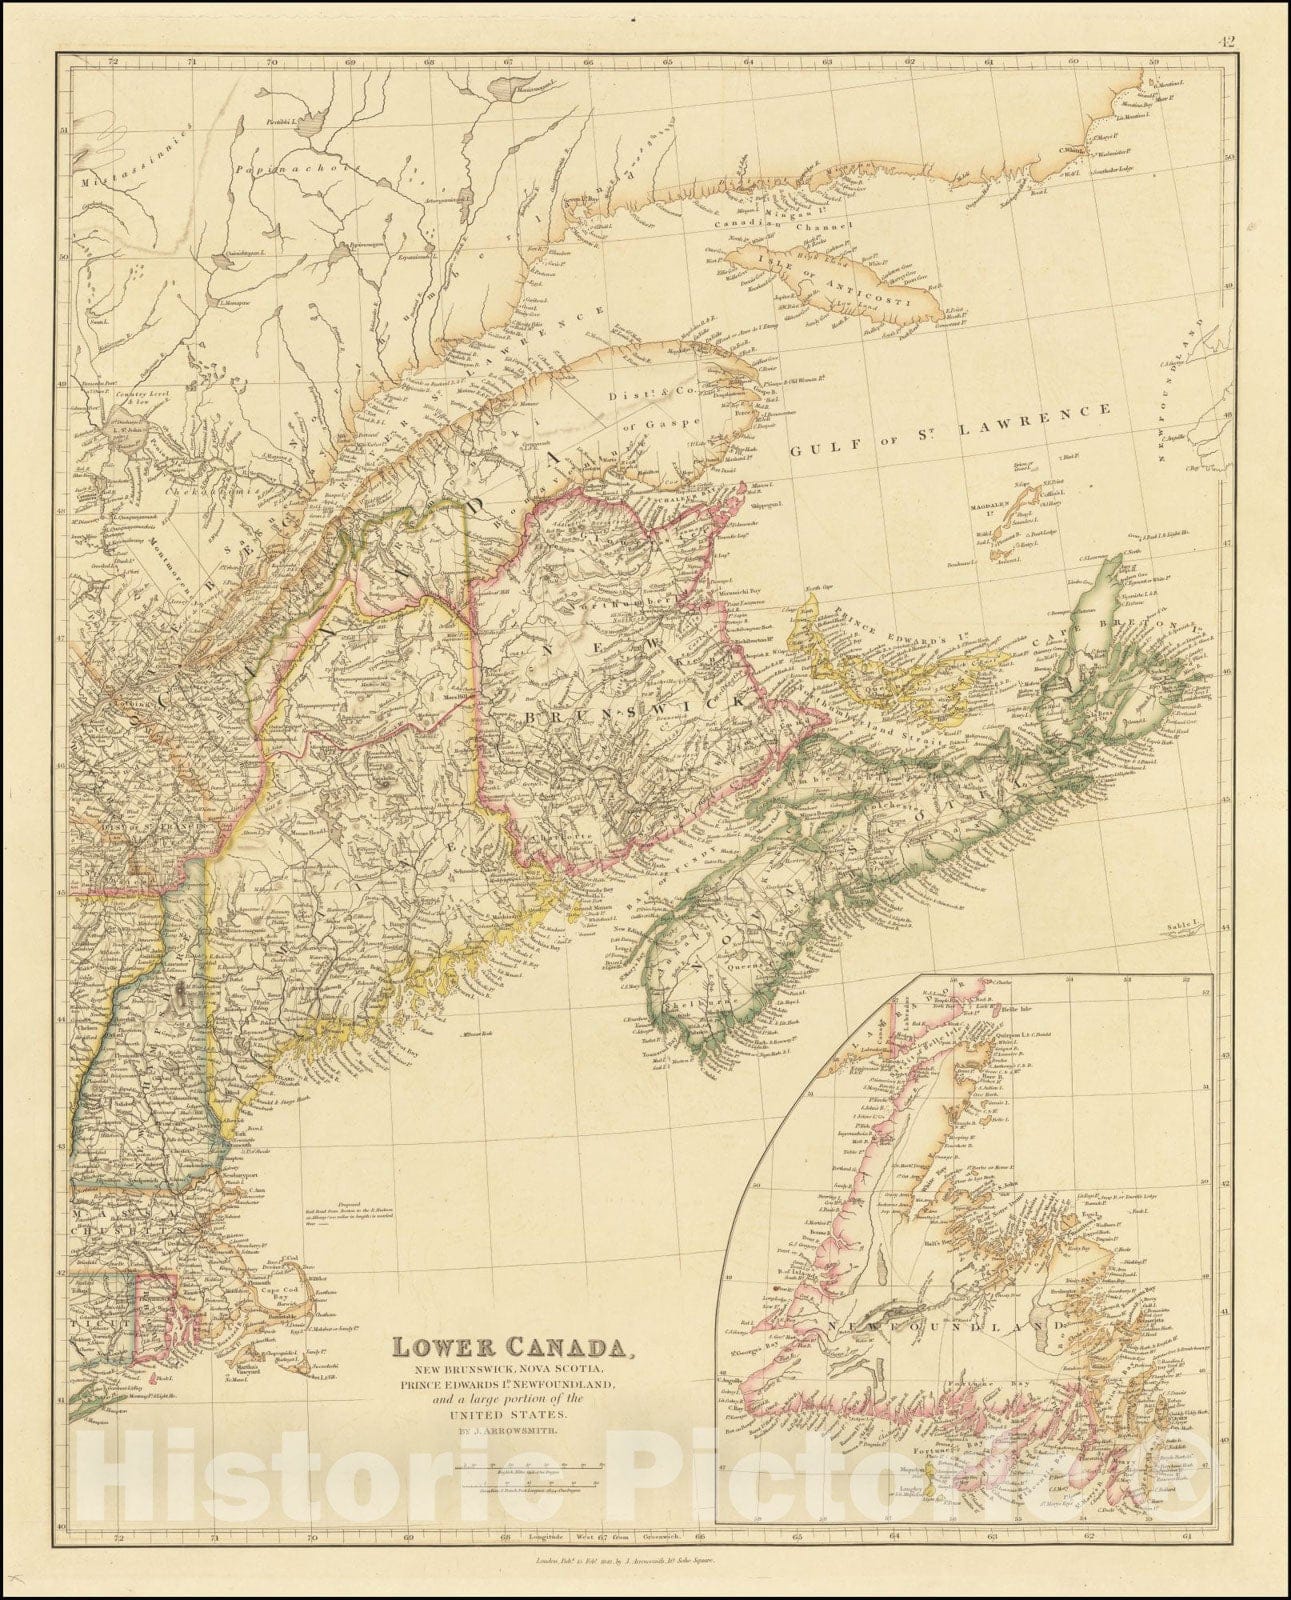 Historic Map : Lower Canada, New Brunswick, Nova Scotia, Prince Edward Id., Newfoundland, and a large portion of the United States, 1842, Vintage Wall Art